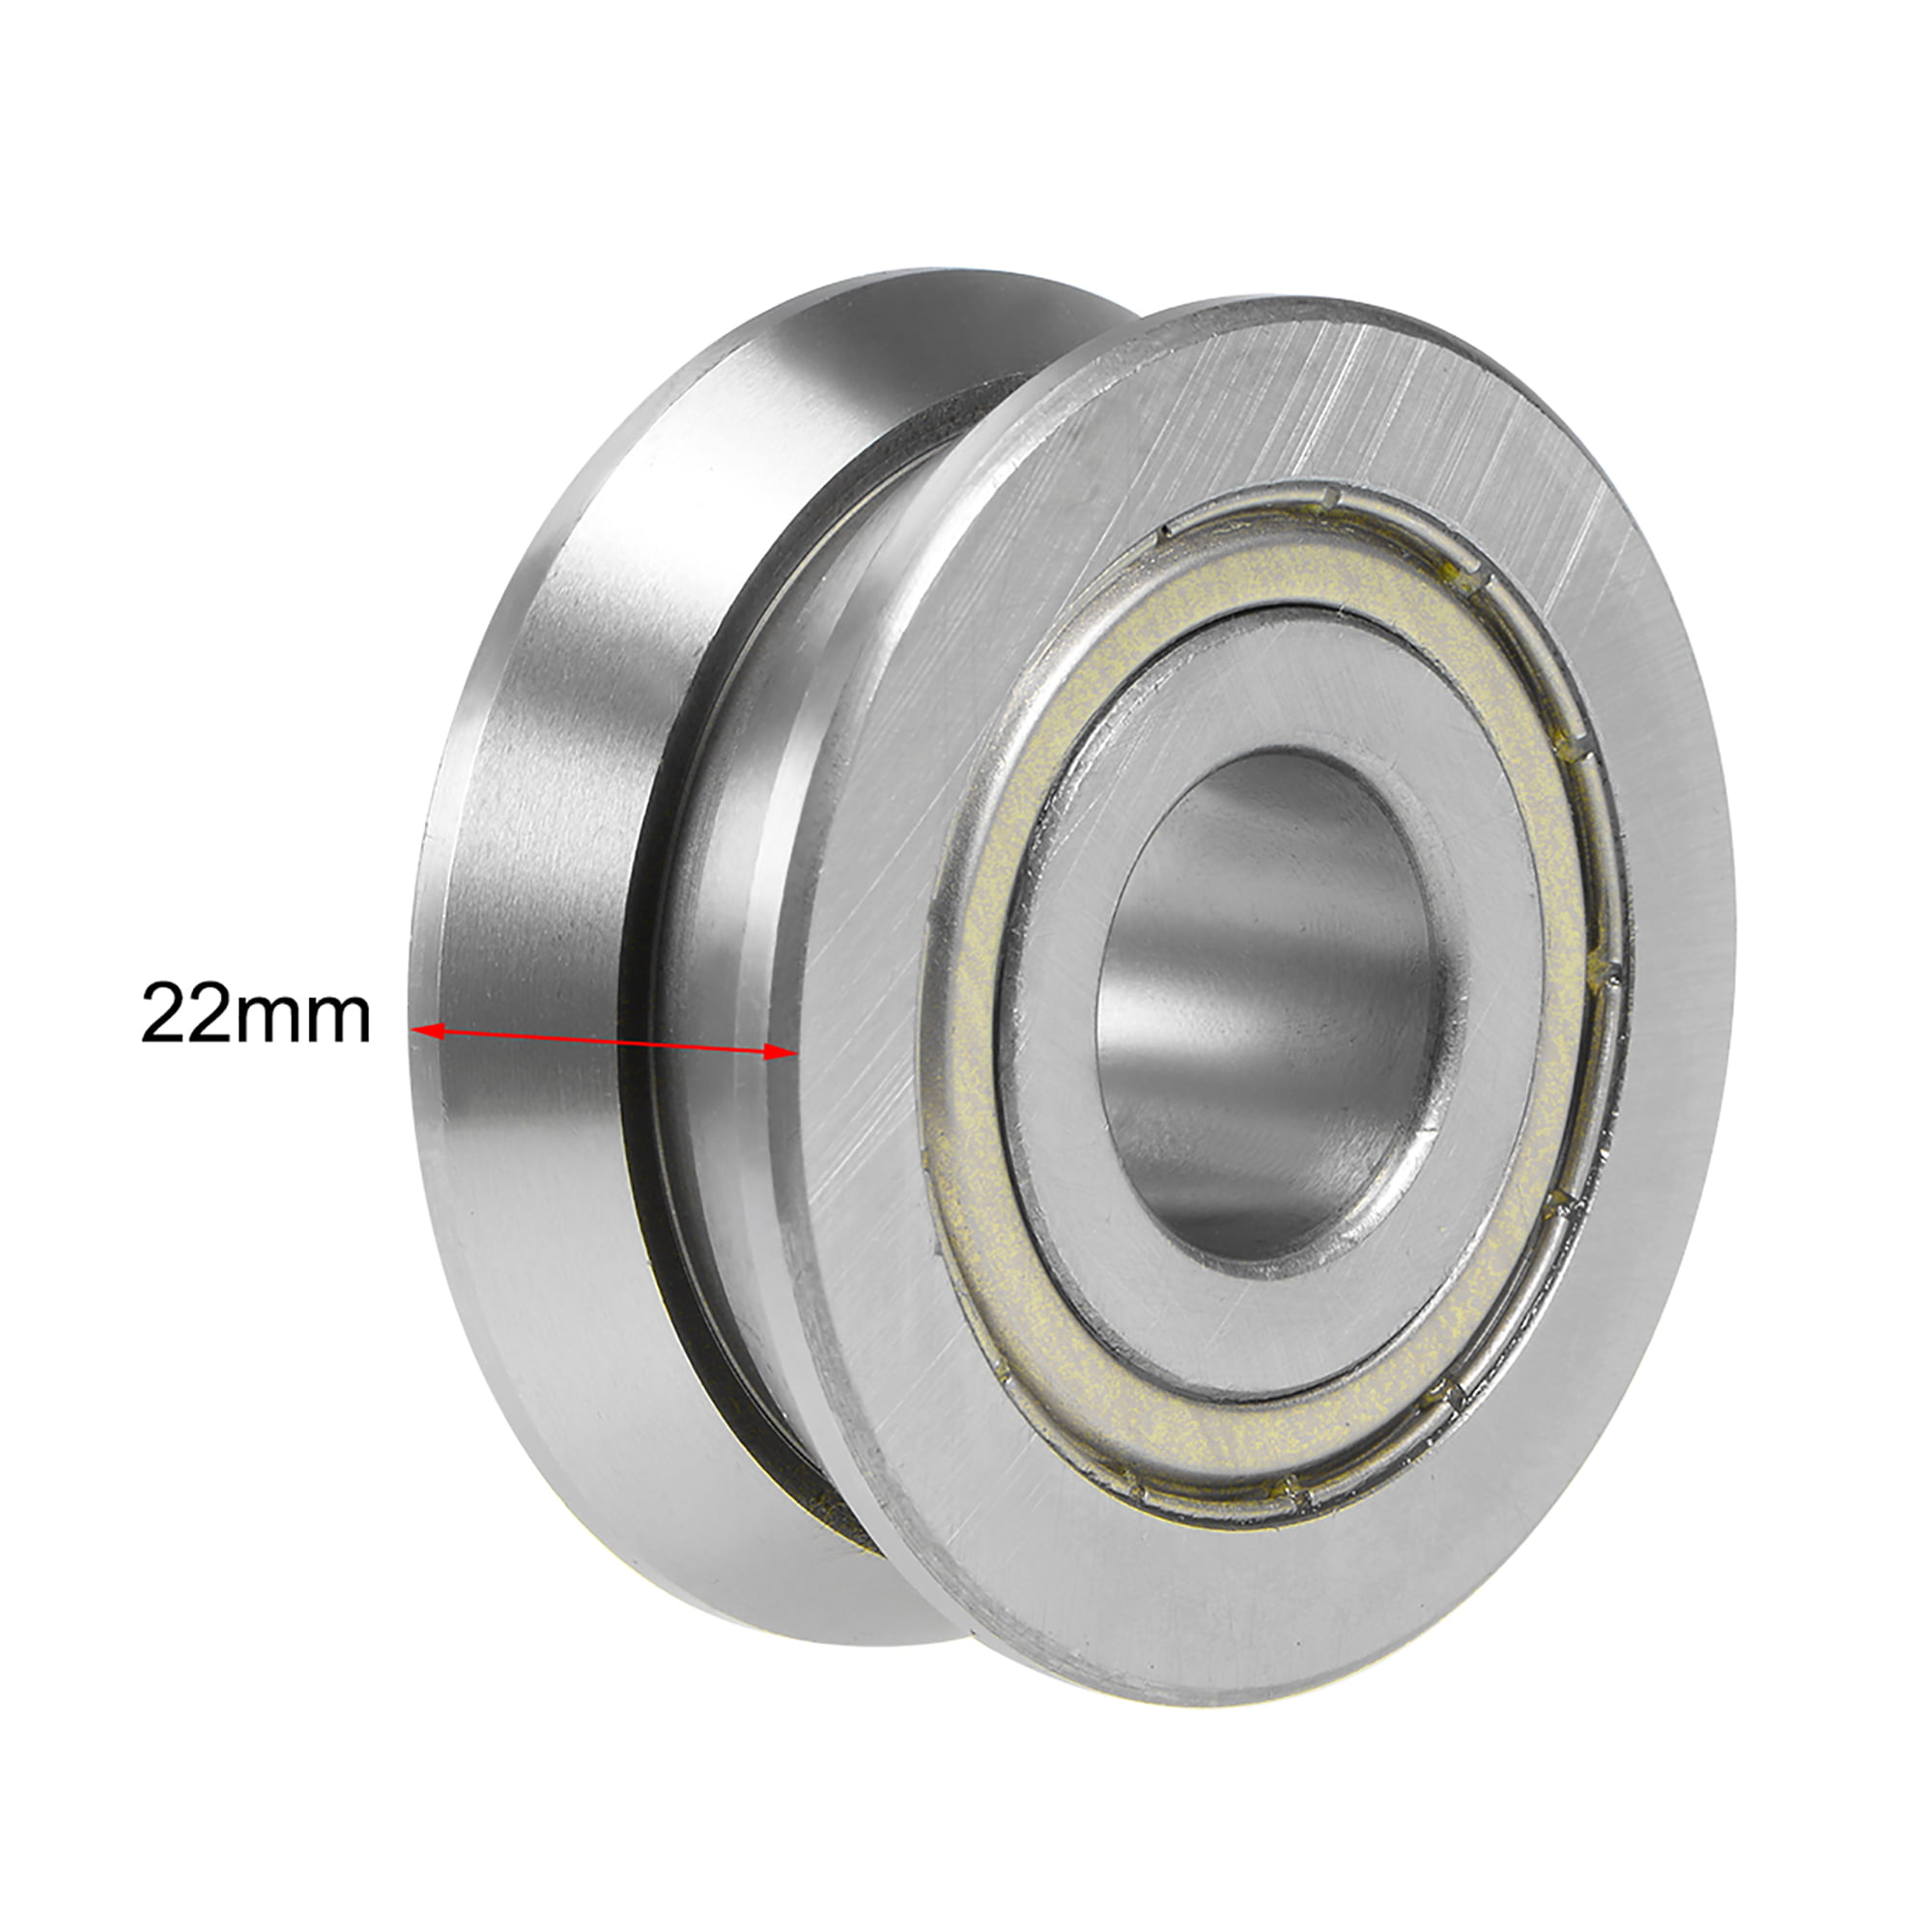 Uxcell 0.31'' x1.18''x0.55'' V-Groove Ball Bearing Guide Pulley Bearings  Chrome Steel Silver Tone 1pcs